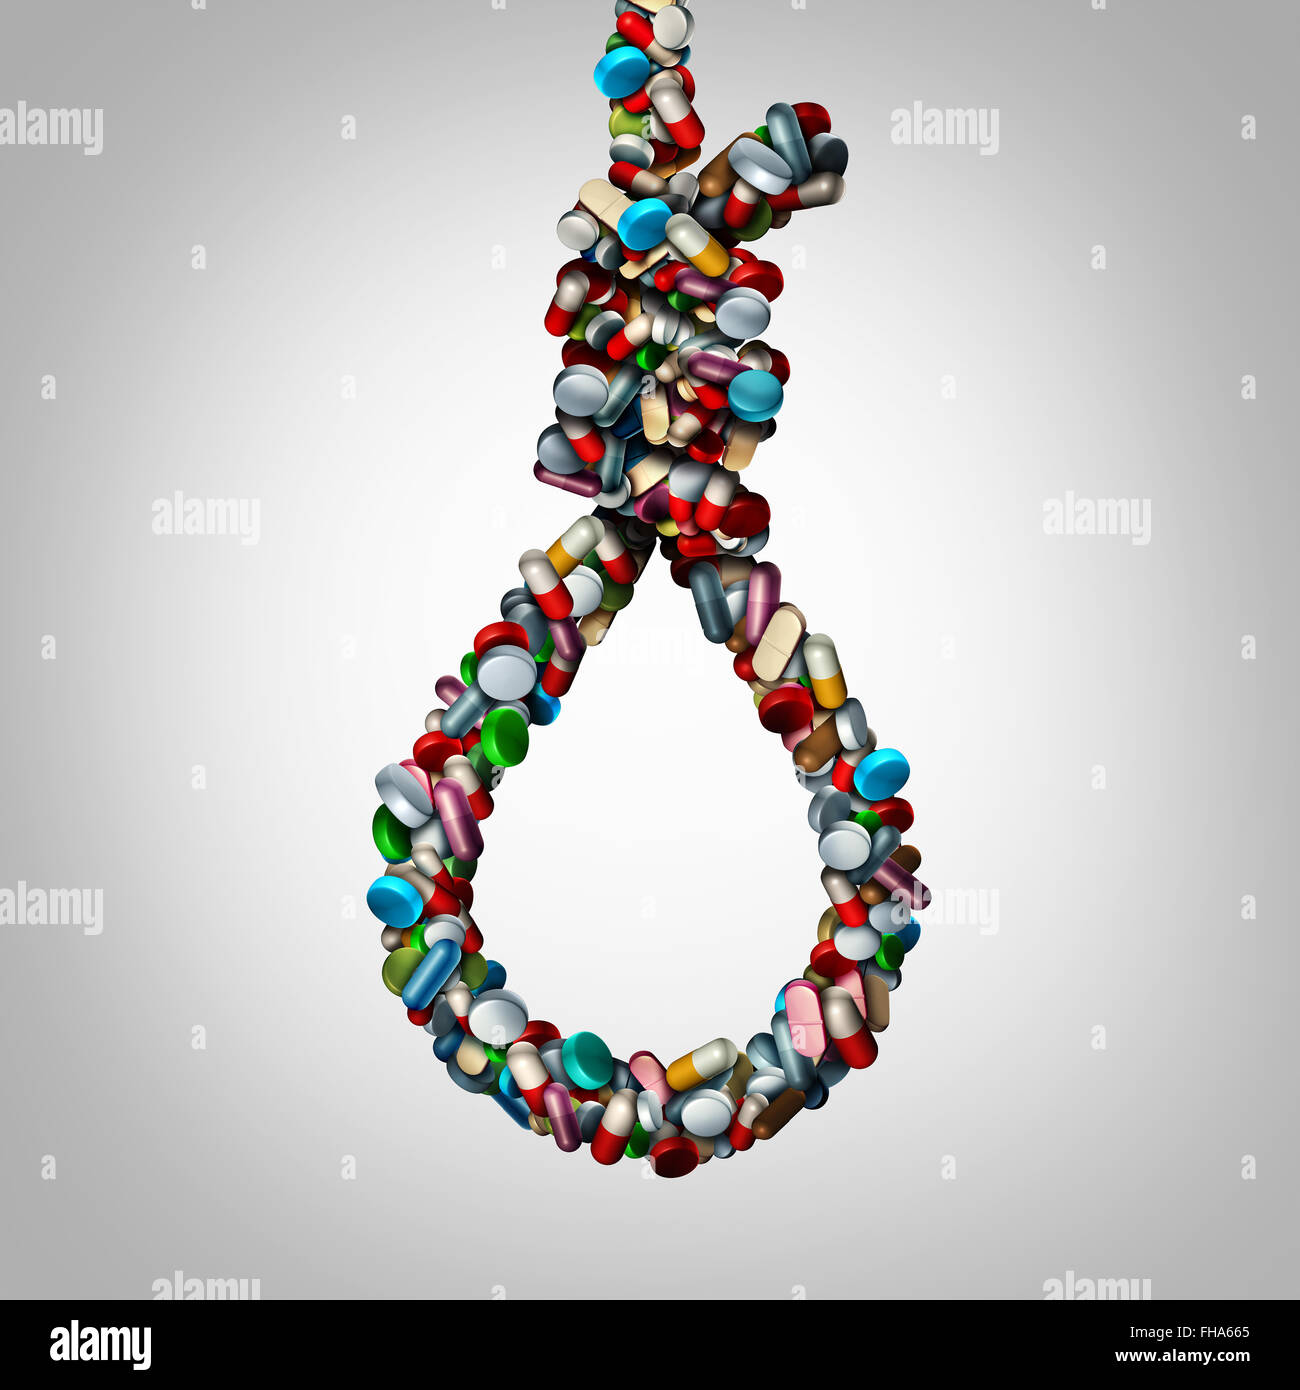 Medicine danger and prescription drug addiction medical concept as a group of medicine capsules and painkiller pills shaped as a suicide noose as a health care symbol with a medication addict risk. Stock Photo